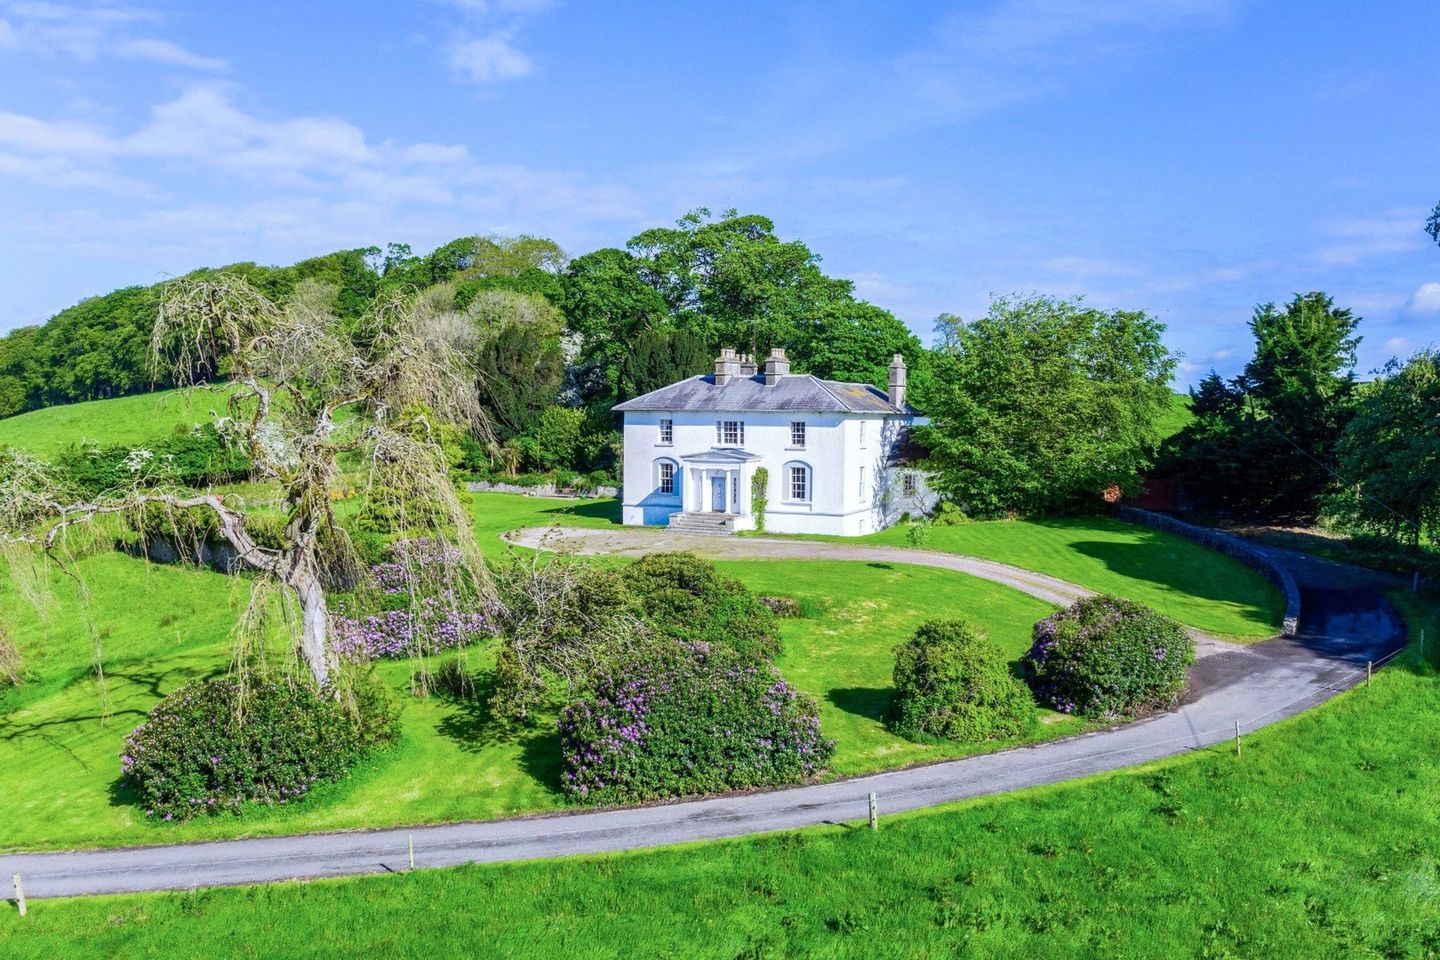 Glynch House & Lands, (The Entire), Approx. 33.02 Ha (81.62 Acres), Newbliss, Co. Monaghan